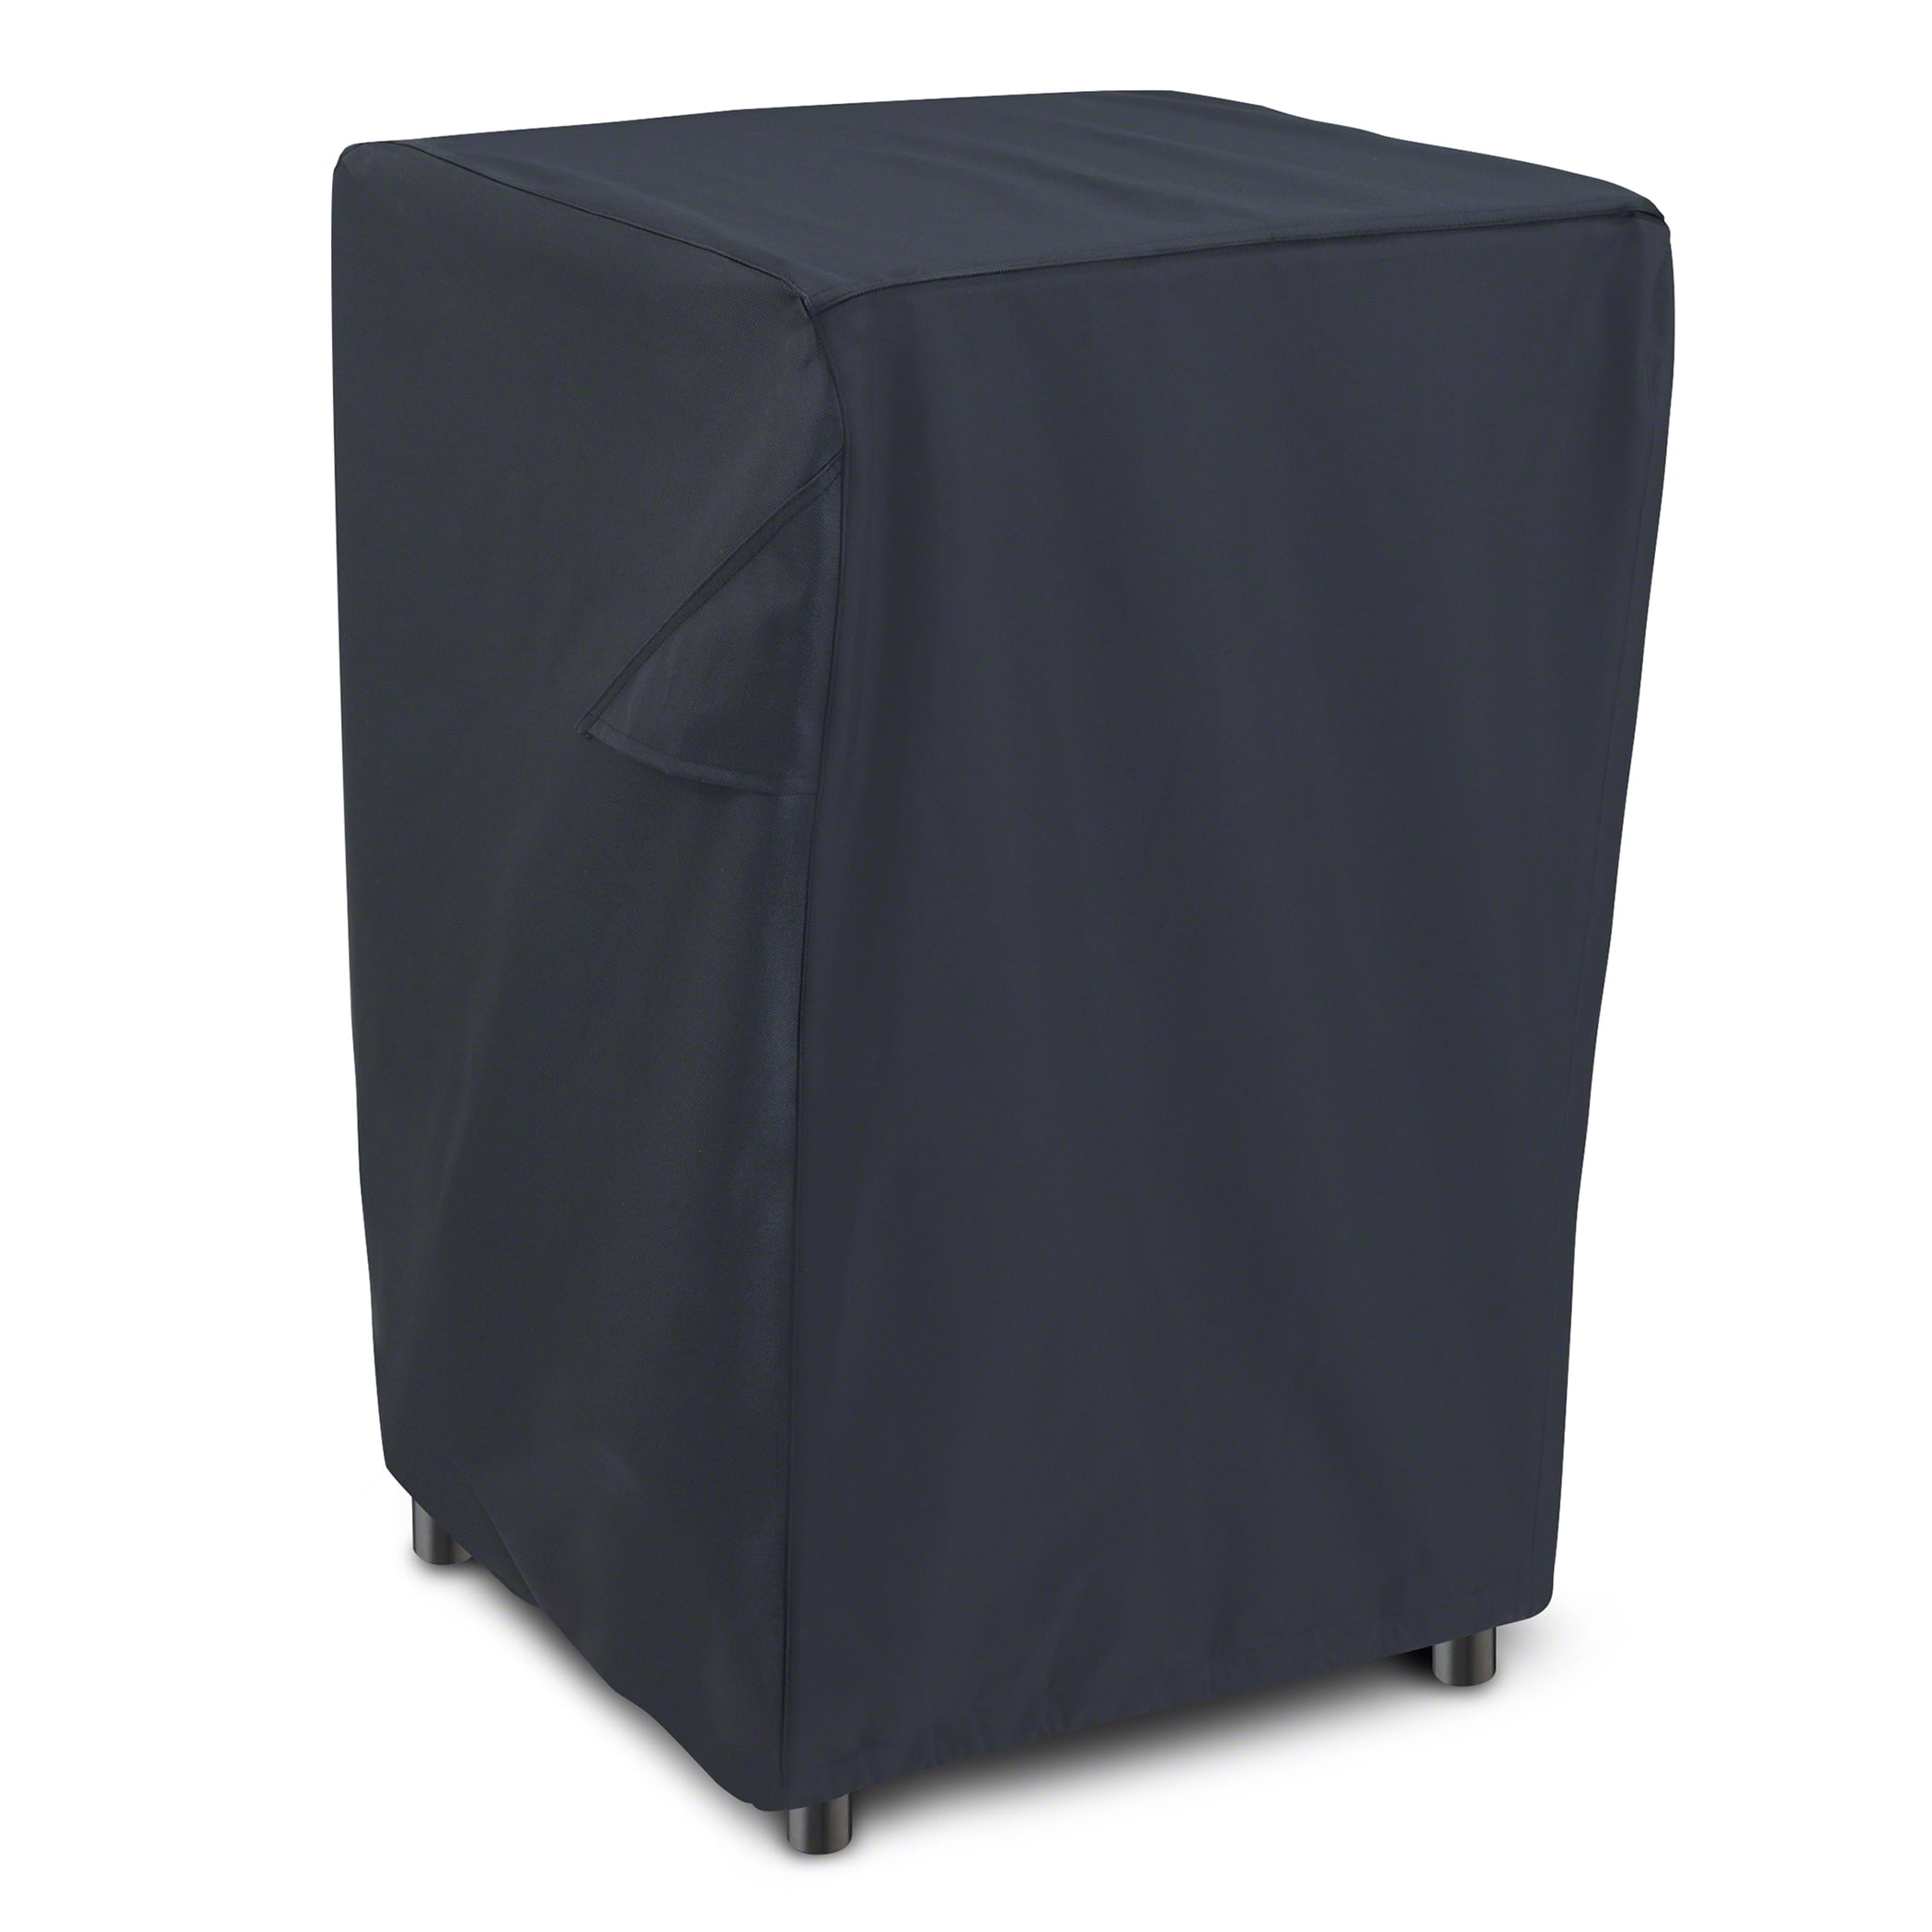 30-inch Grill Covers Heavy Duty Waterproof Square Electric Smoker Cover Garden 